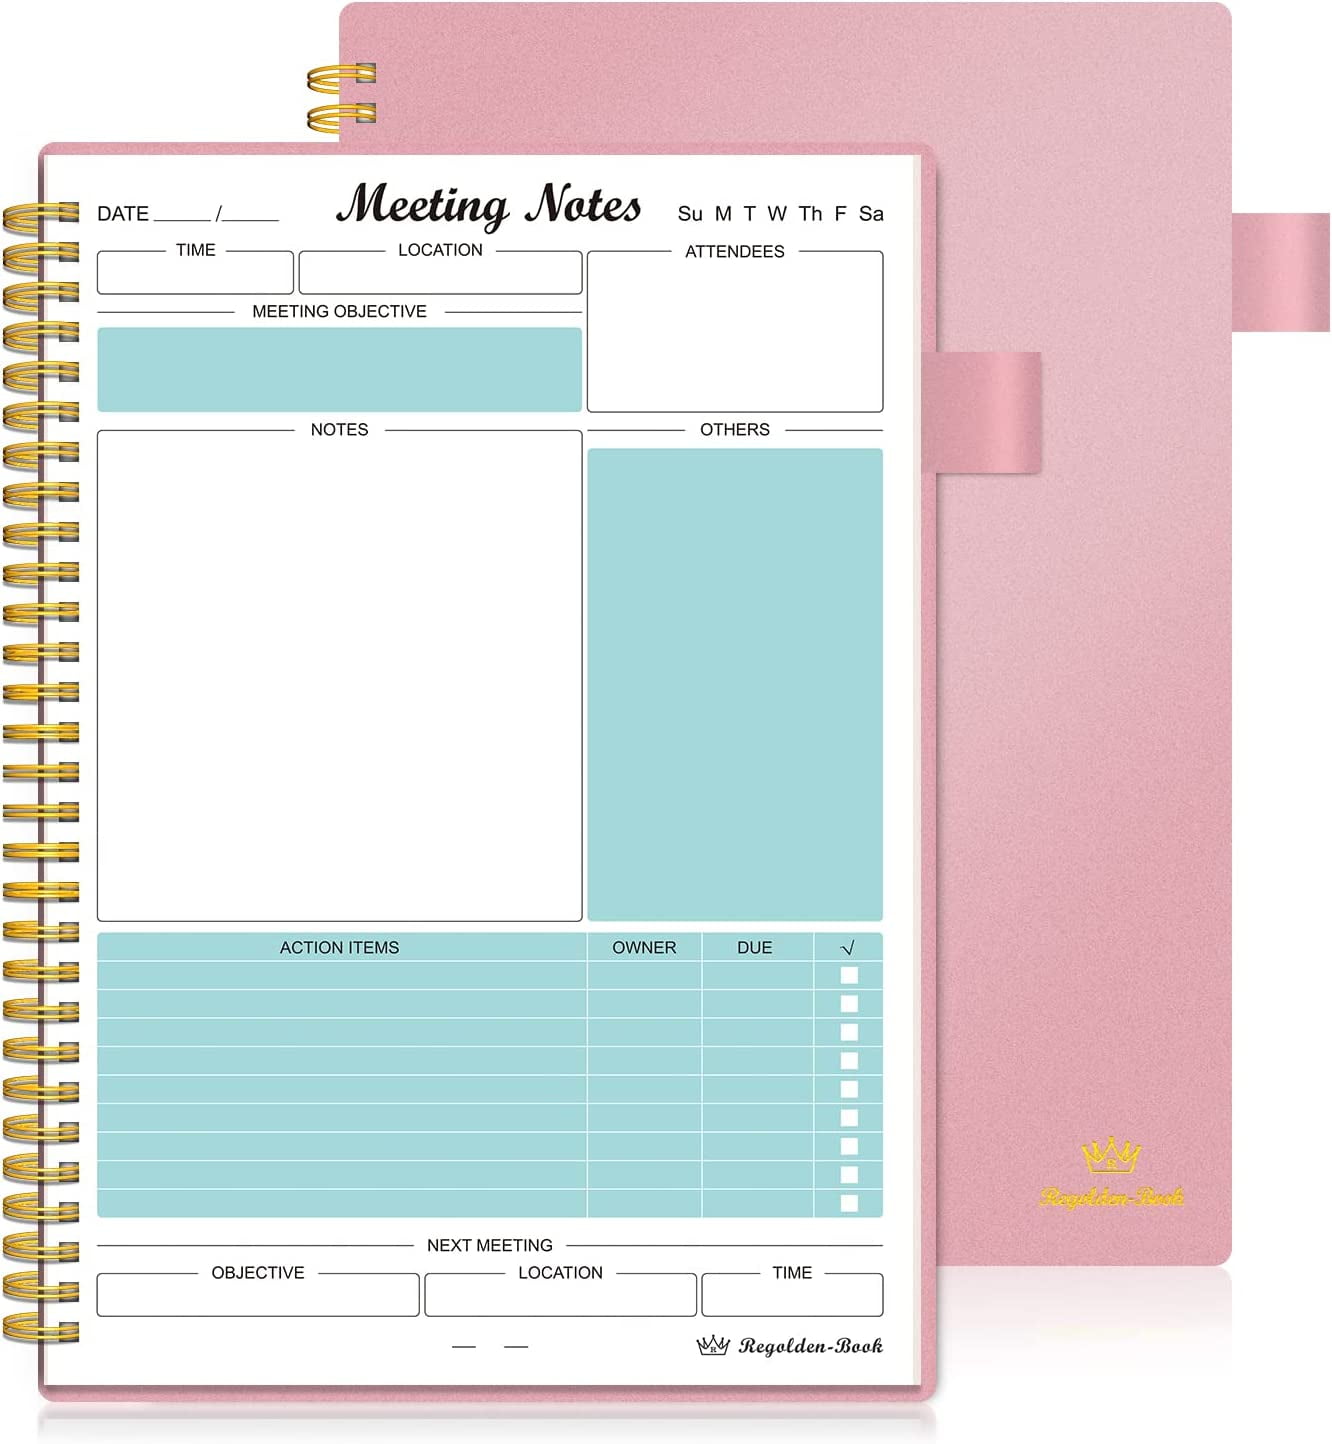 JUBTIC Meeting Notebook for Work with Action Items,Work Notebooks for Note  Taking And Agenda Organizer, The Perfect Office Planner Supplies for Women